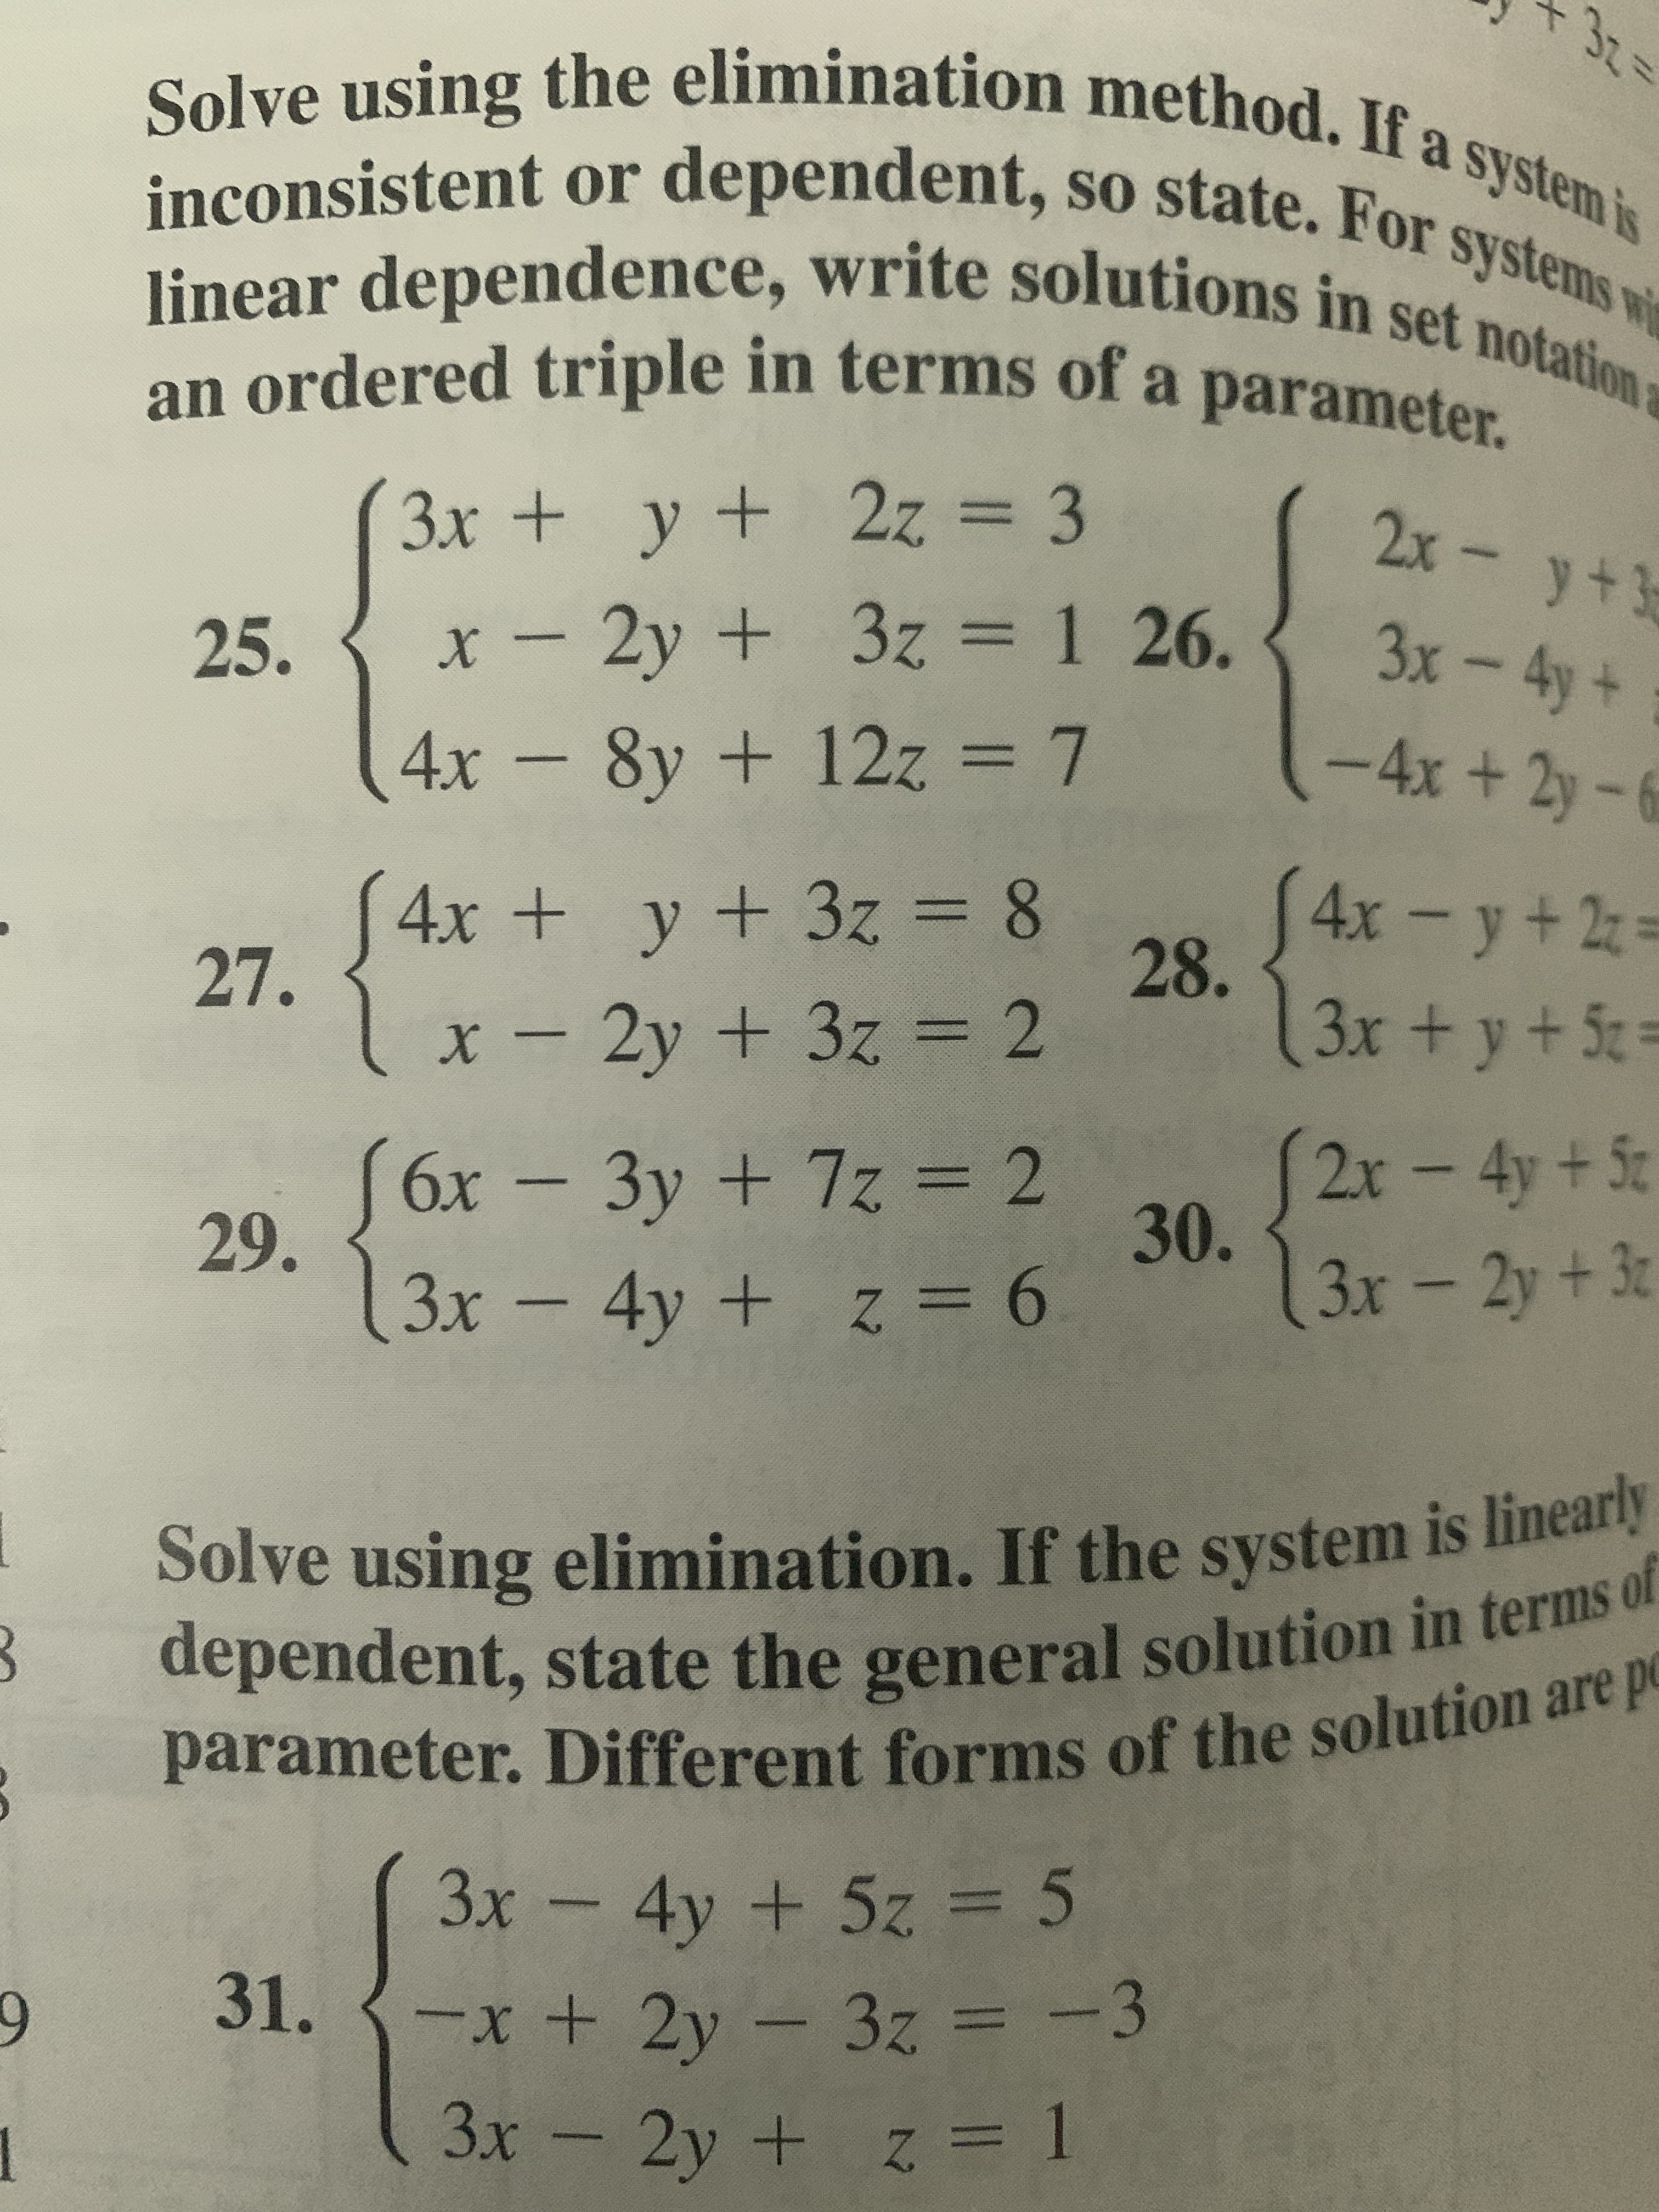 32=
Solve using the elimination method. If a system is
inconsistent or dependent, so state, For
systems wi
linear dependence, write solutions in set notation a
an ordered triple in terms of a parameter.
3x + y + 2z = 3
2z%3D3
2x - y+3
25.
x - 2y + 3z = 1 26.
3x-4y+
4x - 8y + 12z = 7
+12z%3D7
-4x +2y-6
4x + y + 3z = 8
27.
4x-y+2z=
28.
3x +y + 5 =
%3D
x - 2y + 3z = 2
%3D
6x - = 2
3y+7z
2x-4y+5c
30.
29.
3x -4y
+ z = 6
3x-2y+3
Solve using elimination. If the system is linearly
dependent, state the general solution in terms of
parameter. Different forms of the solution are p
3x - 4y + 5z = 5
31.
-x+ 2y - 3z = -3
1
3x - 2y + z = 1
